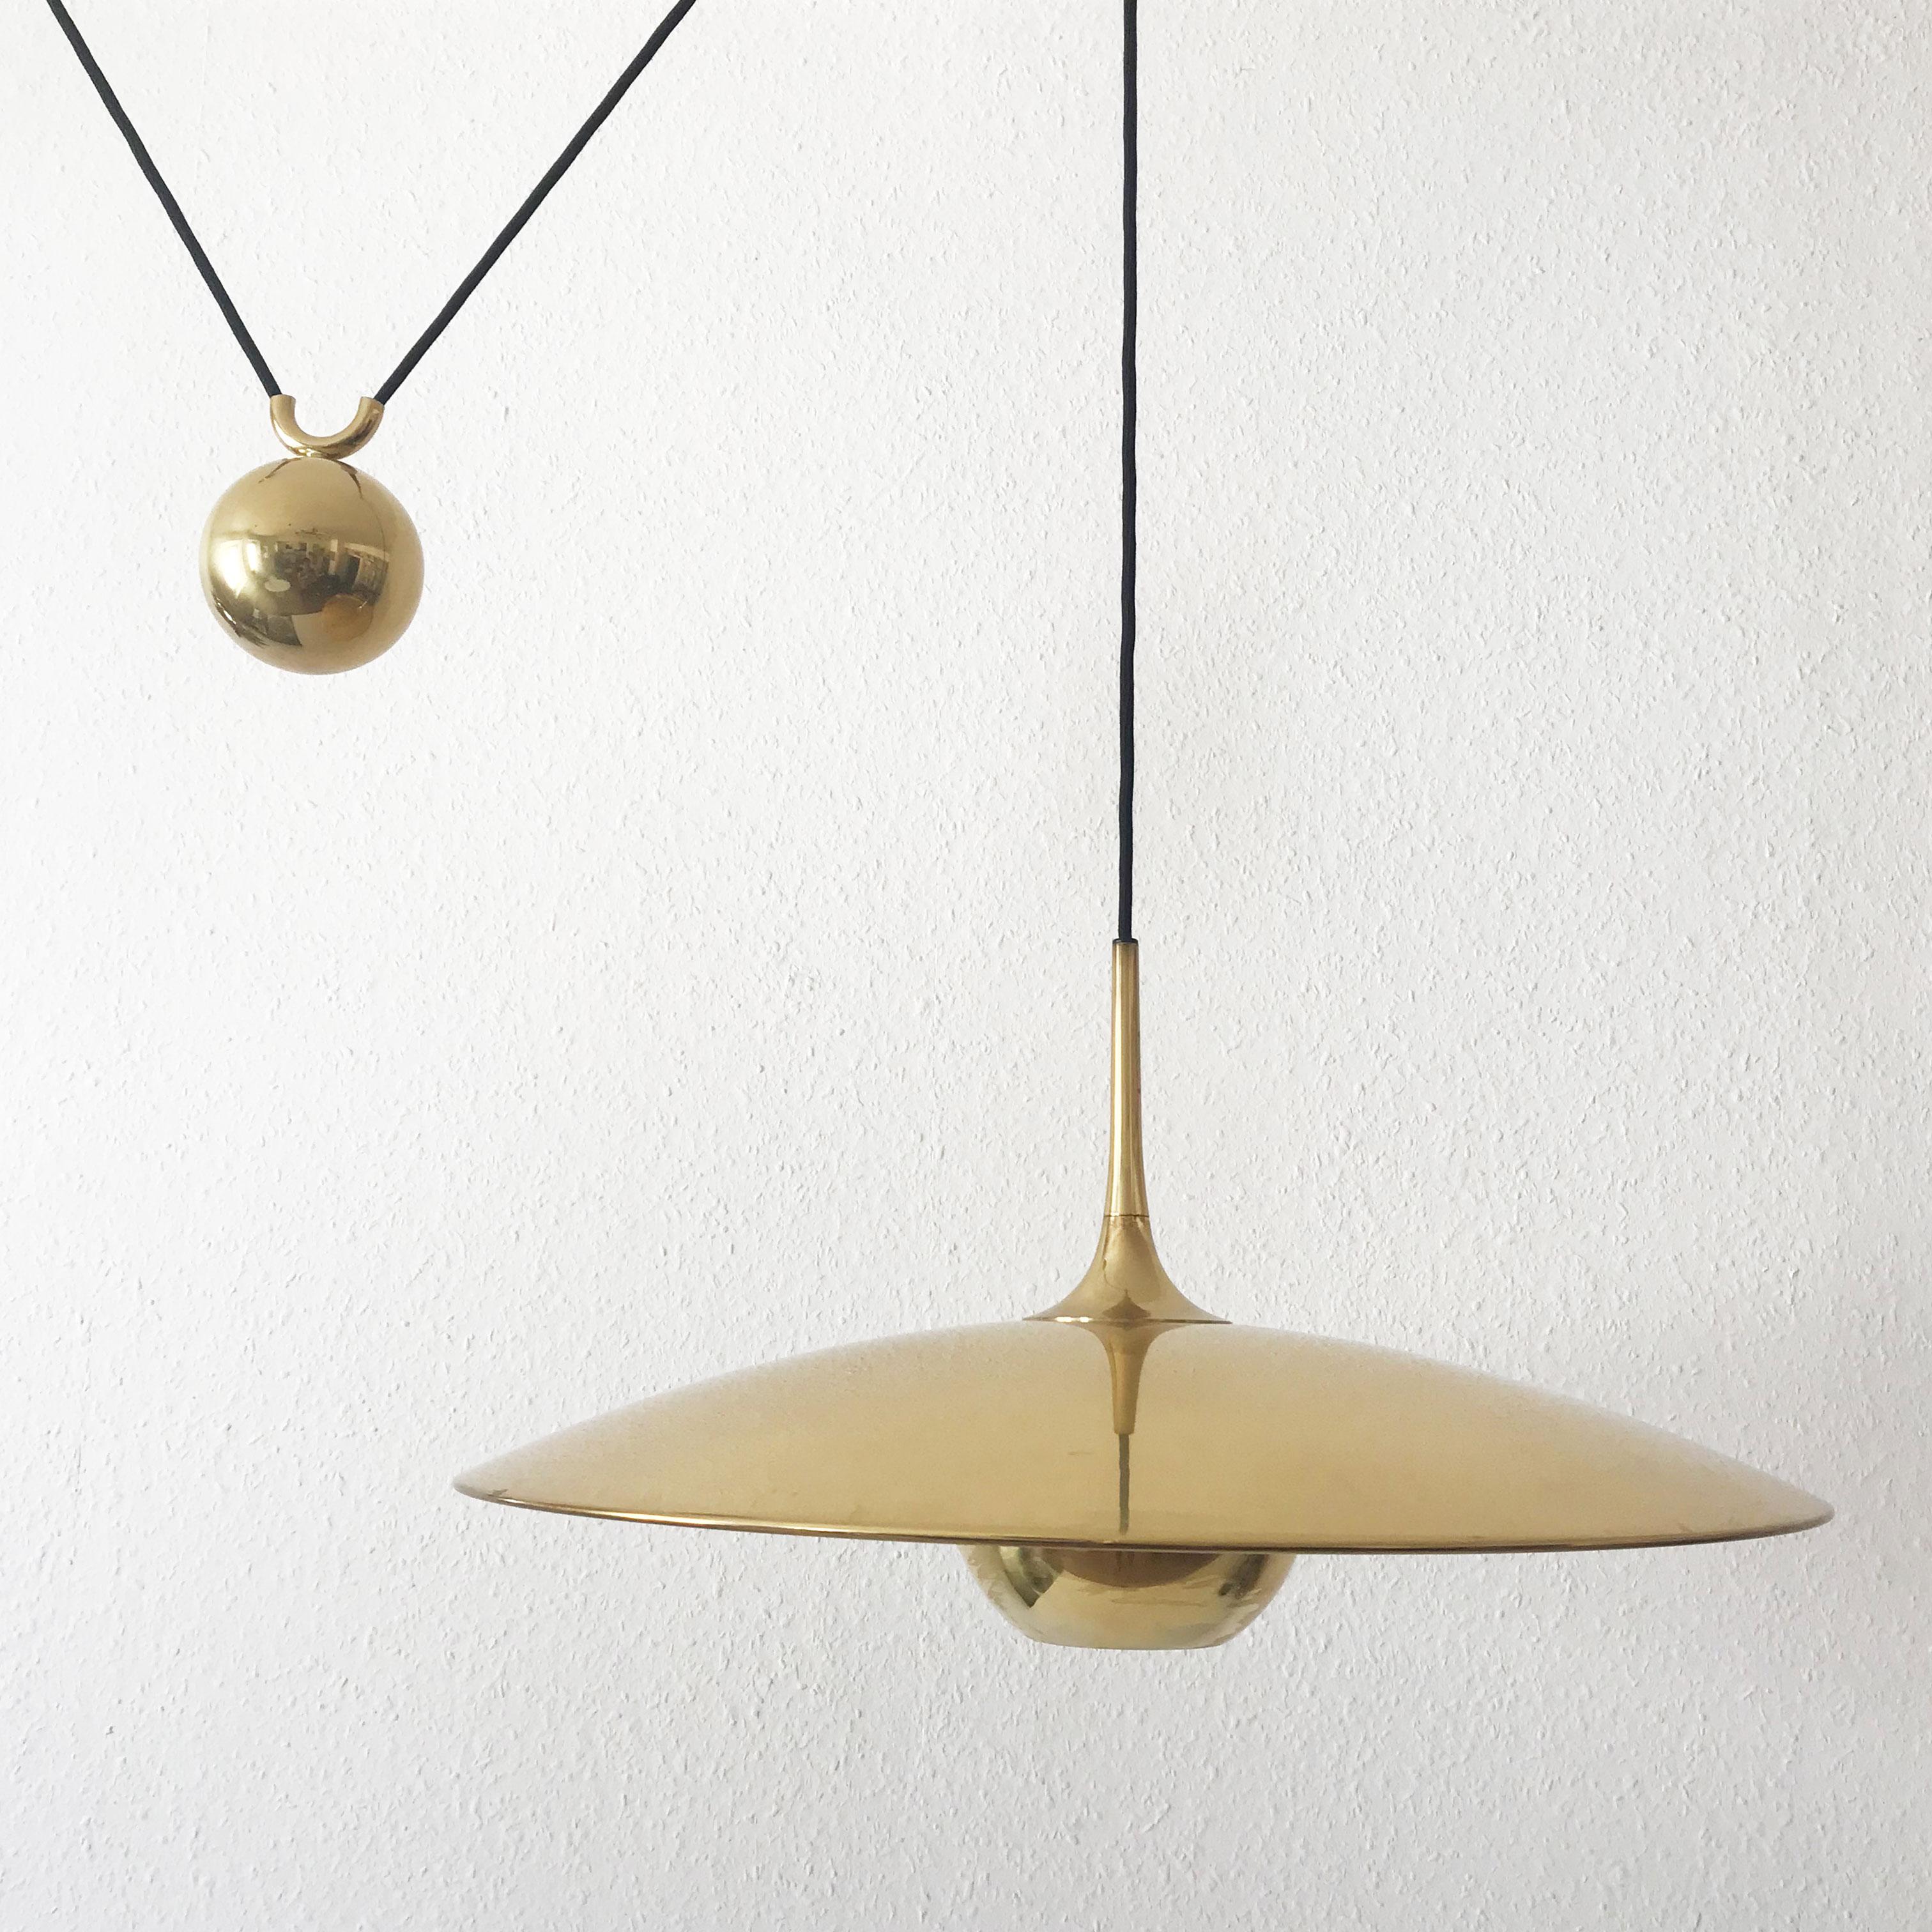 Mid-Century Modern Counter Balance Pendant Lamp Onos 55 by Florian Schulz, 1980s, Germany